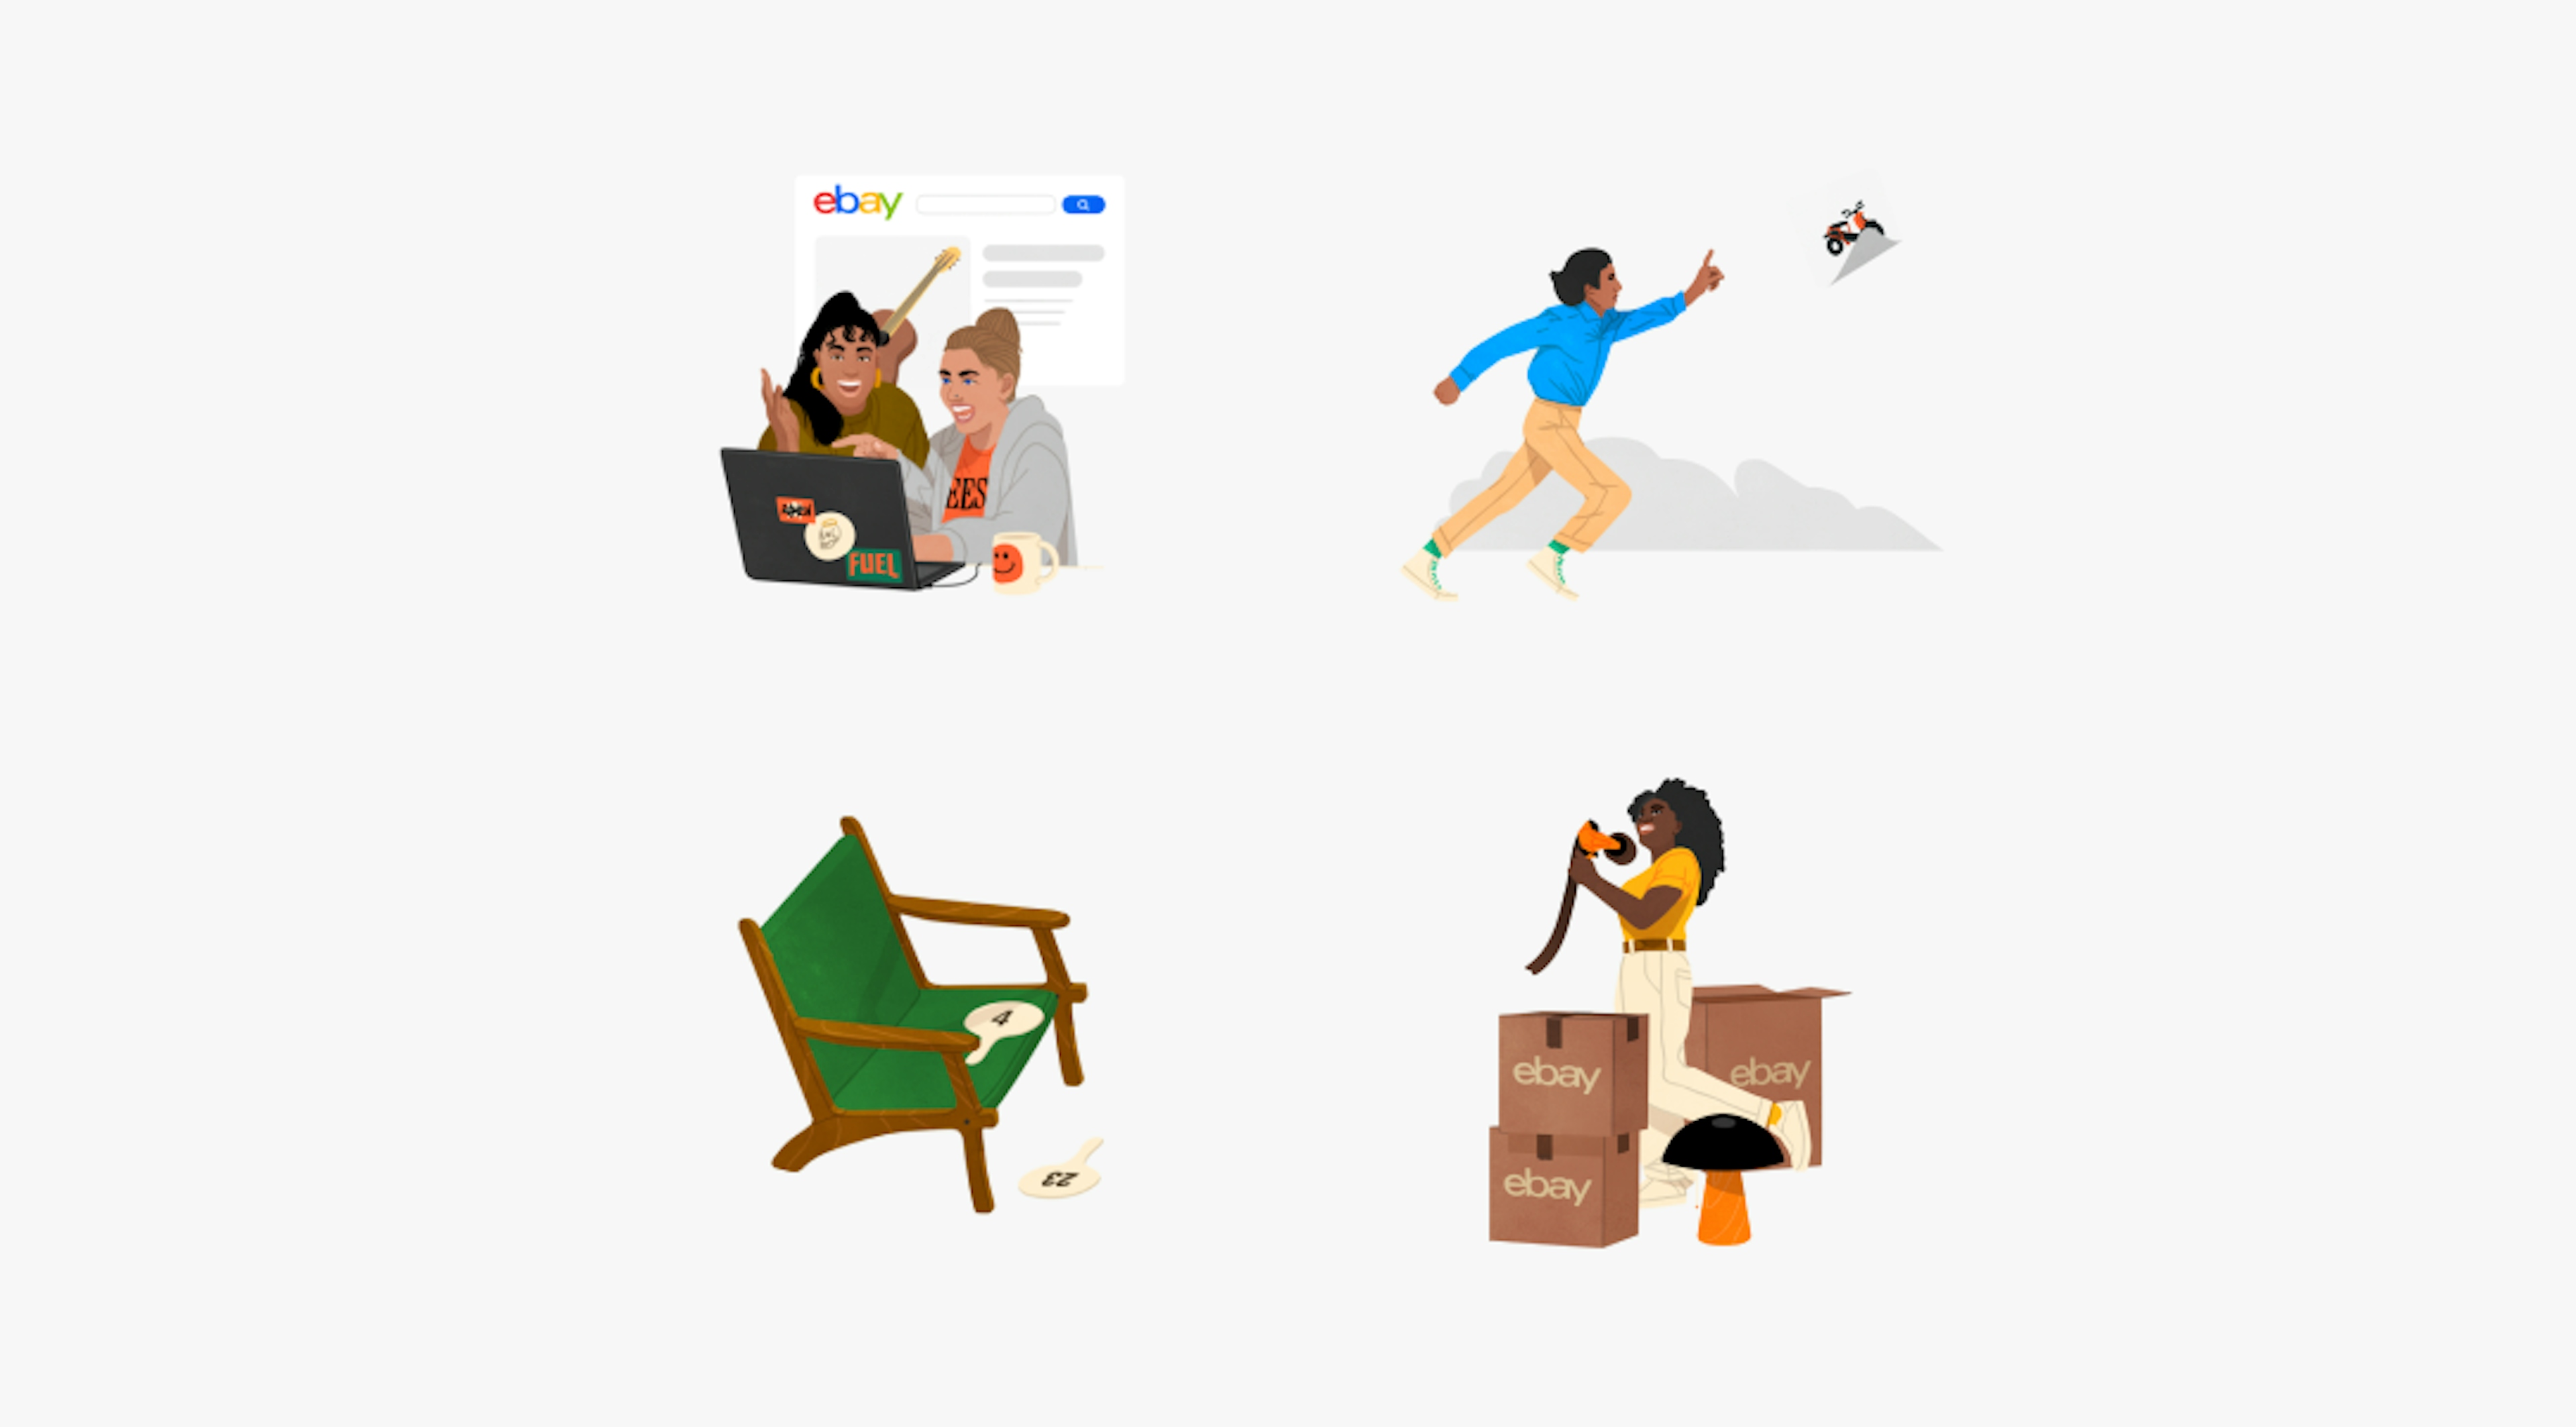 4 distinct illustrations highlighting bidding & celebration:
Two people are sitting at a laptop with eBay on the screen, smiling and drinking from a mug.
A person in a blue jacket is running and pointing at a small motorcycle on a piece of paper in the sky.
A green chair with a table tennis paddle and ball placed on it.
A person is unboxing items from eBay-branded boxes, holding up an orange and black item tape dispenser.